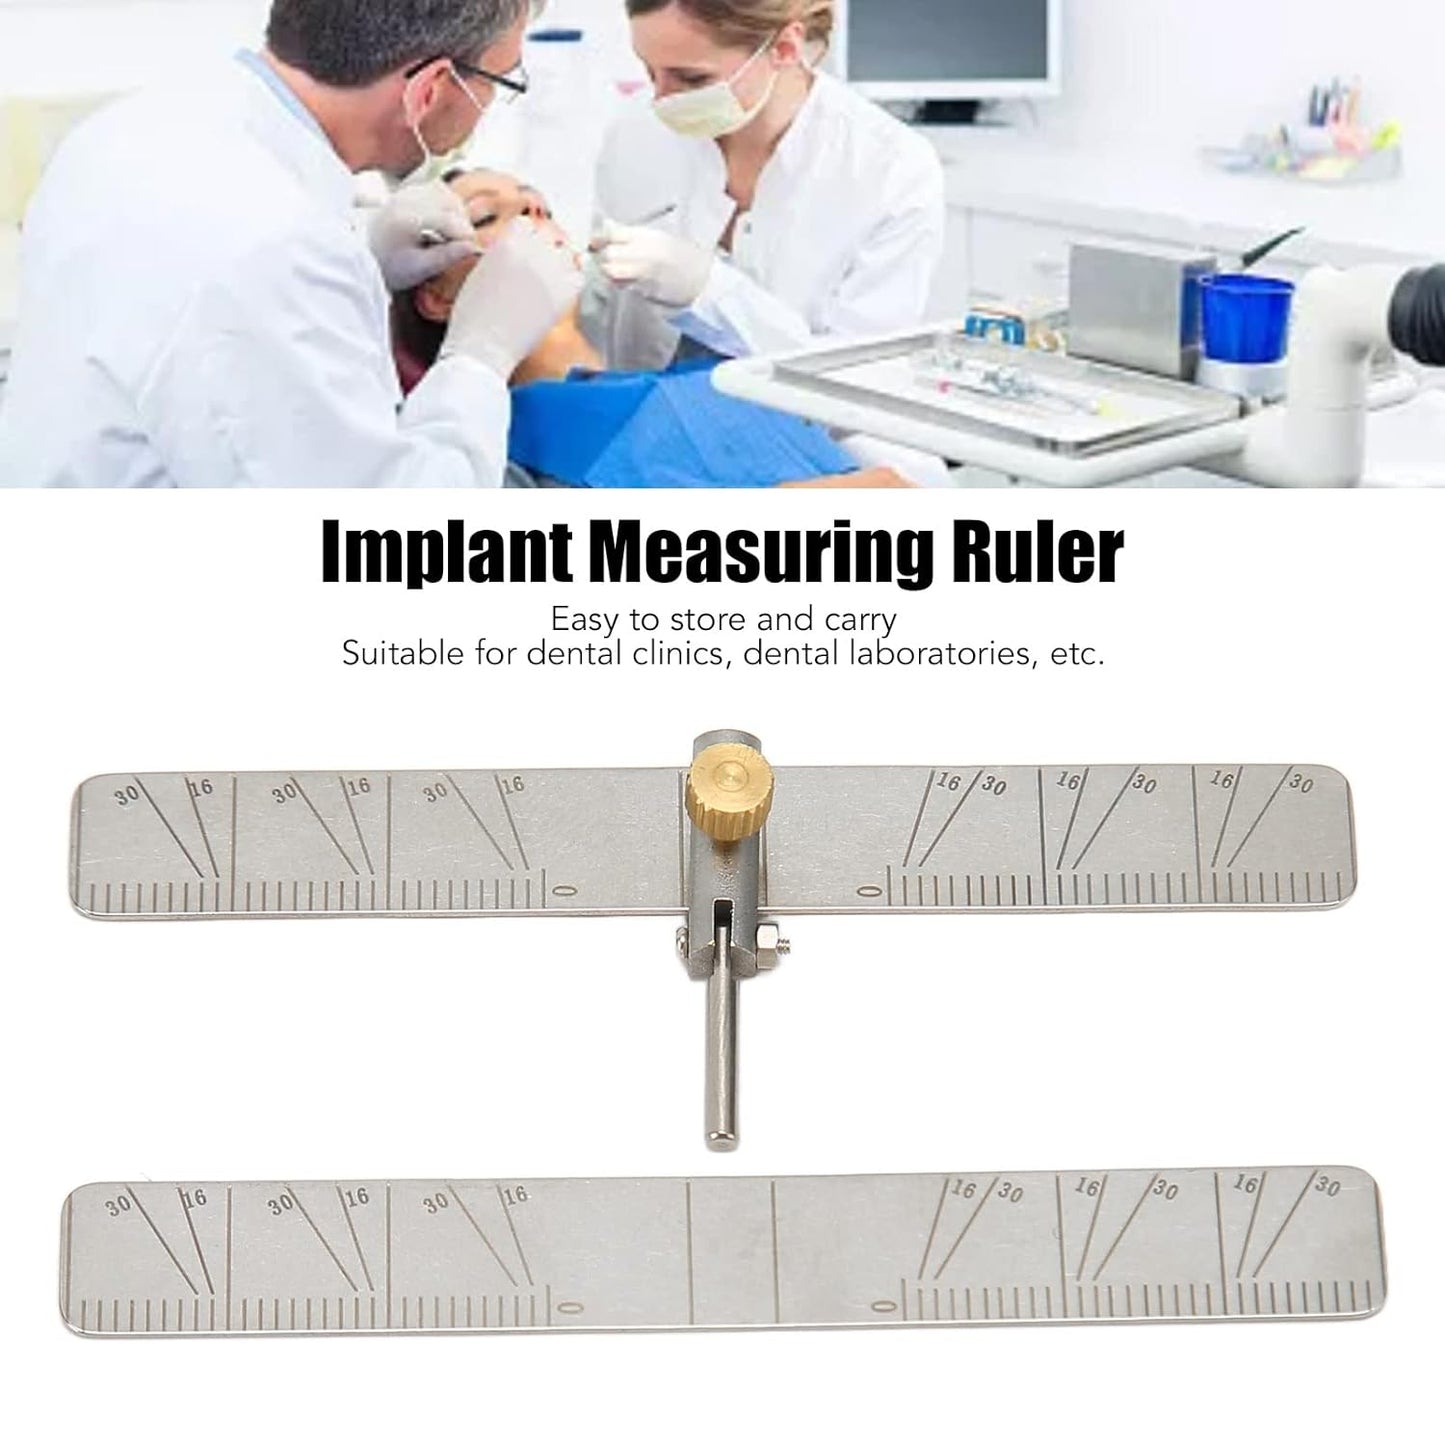 Dental Implant Locating Guide, Oral Implant Teeth Measuring Ruler Caliper for Mouth, Implant Measuring Ruler for Dental Tools, Surgical Planting Positioning Locator